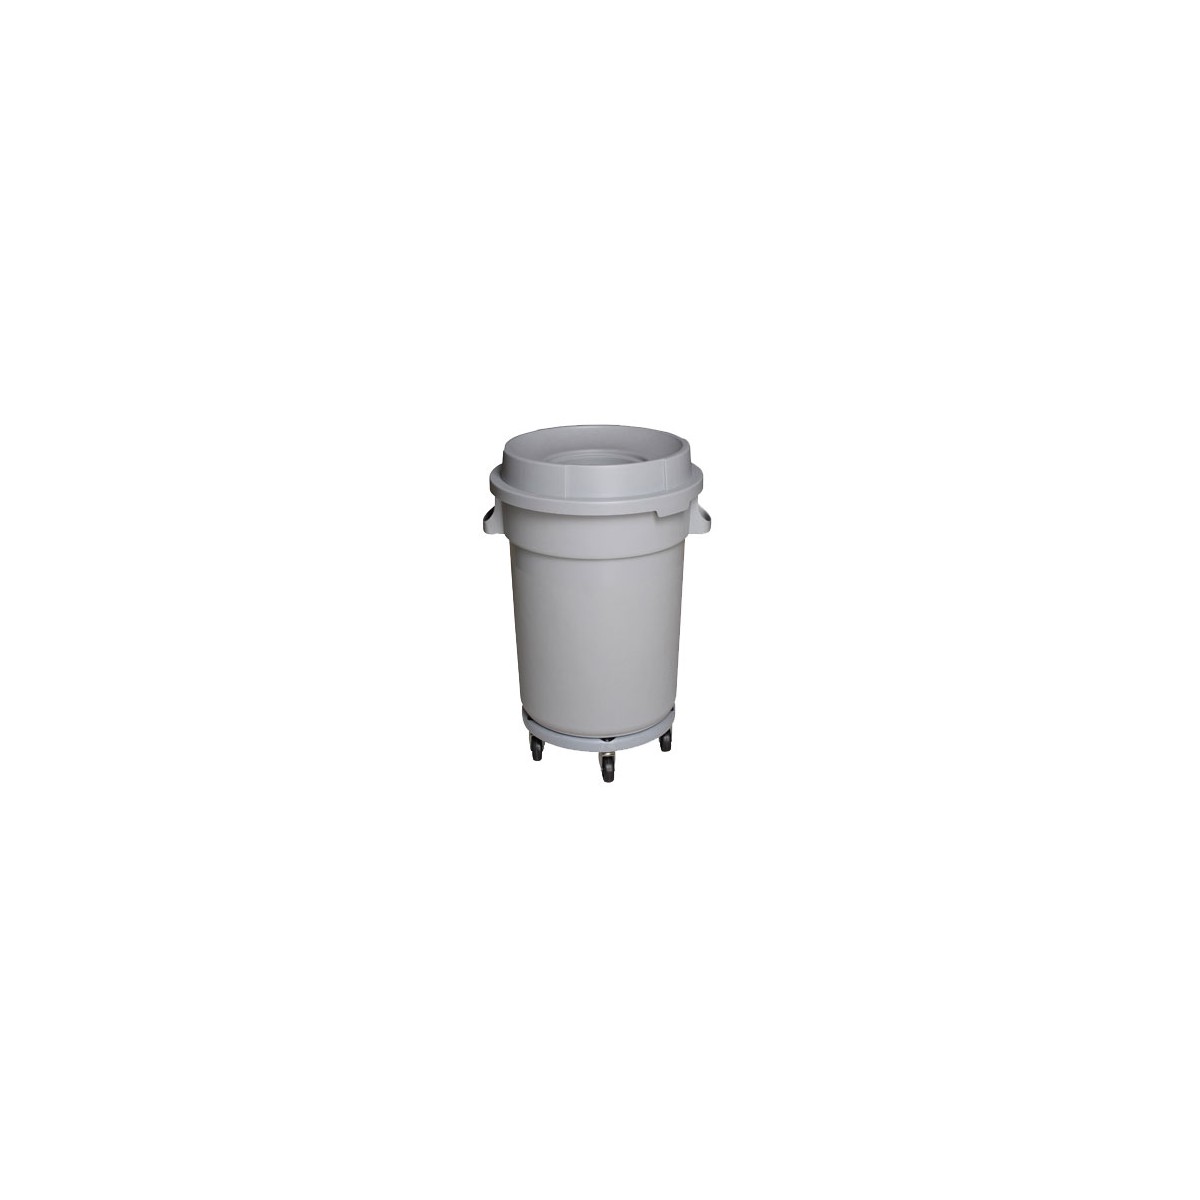 Round Trash Garbage Can Bin with Lid - Drum Dolly - 20 gal (88L